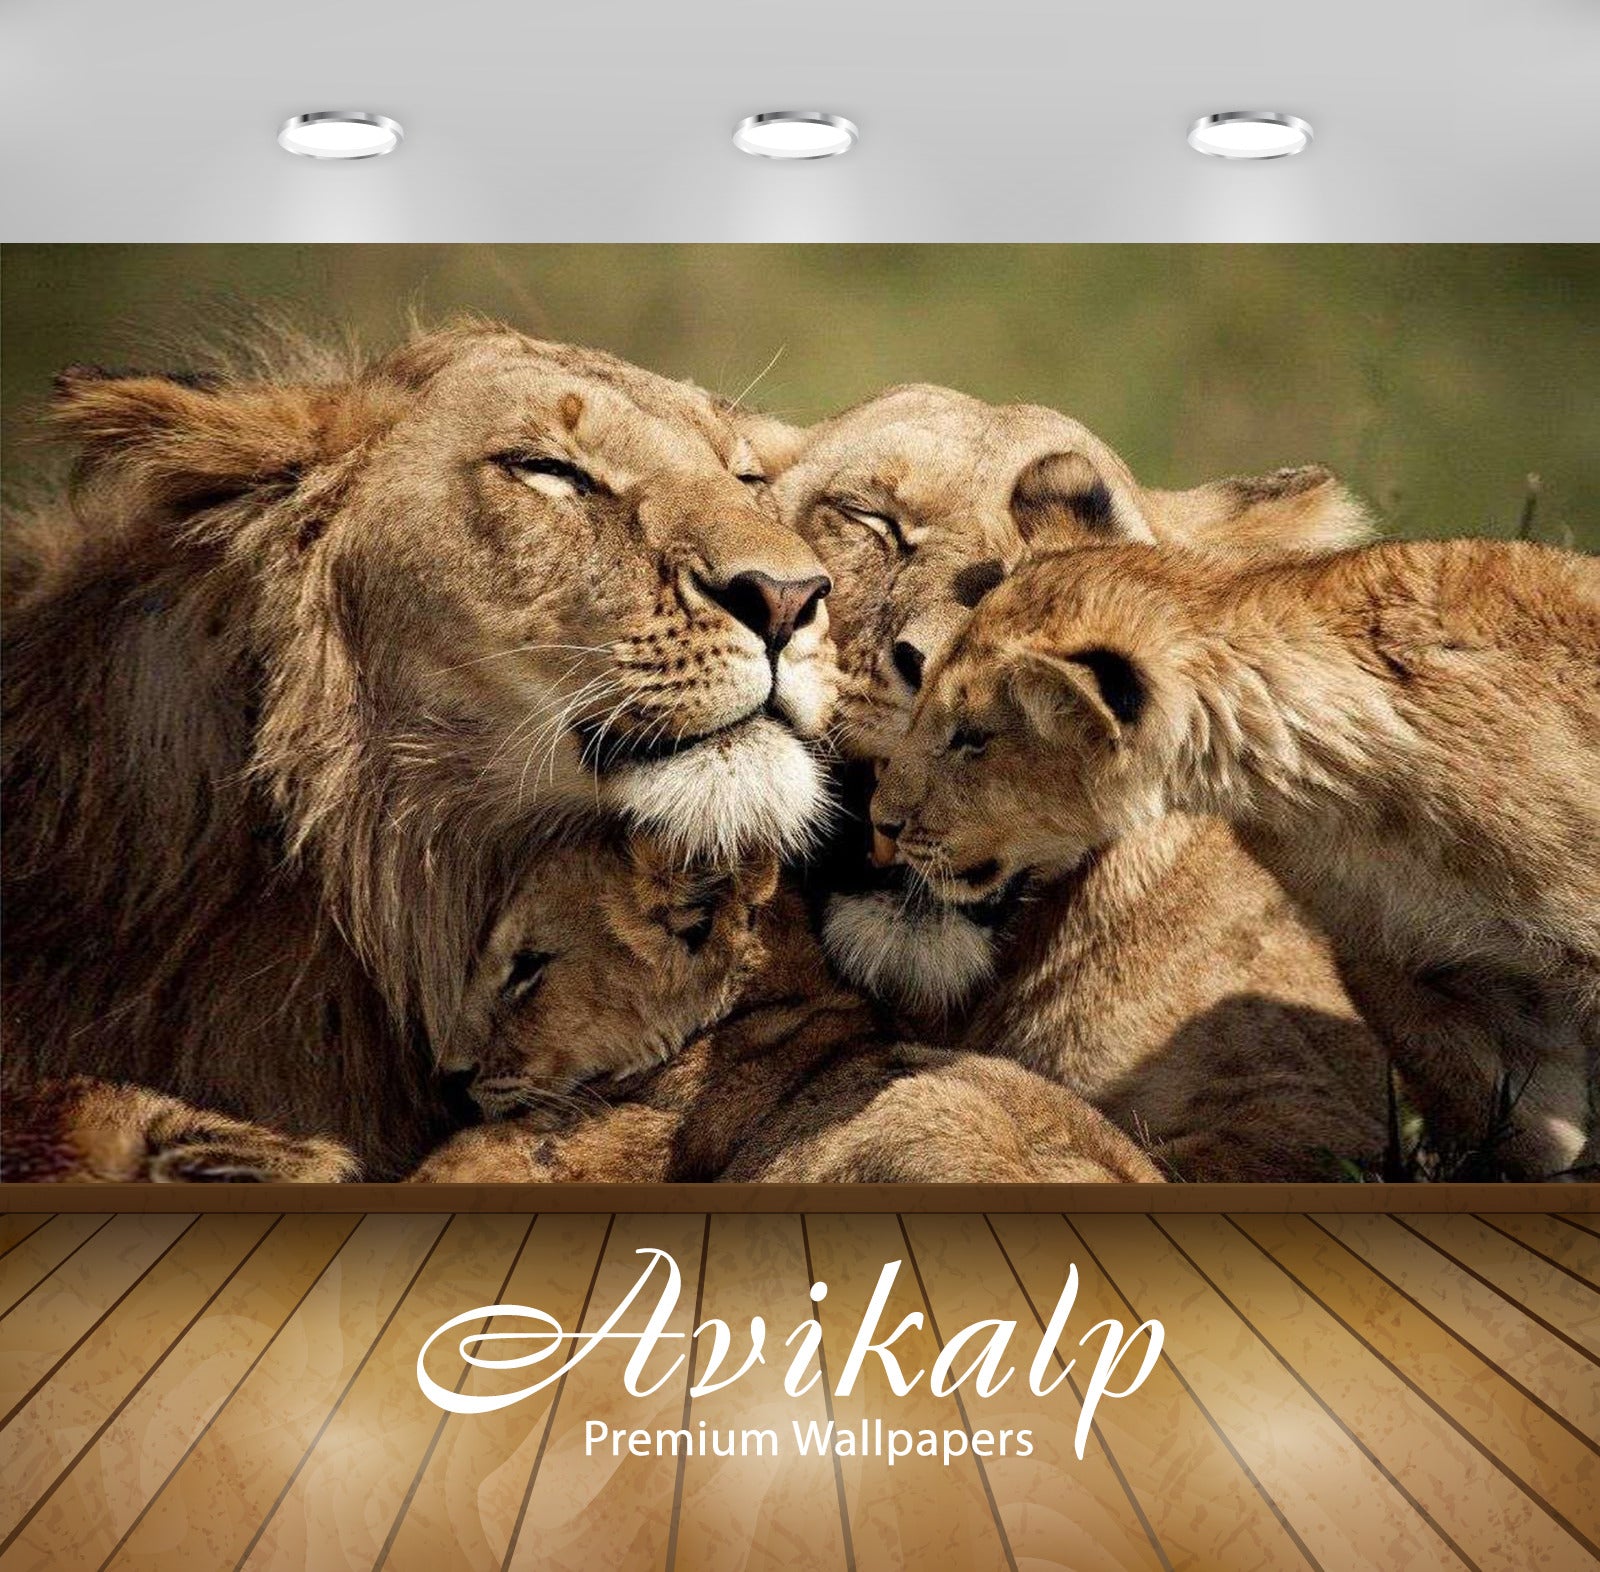 Avikalp Exclusive Awi2235 Lions love a family of lion Full HD Wallpapers for Living room, Hall, Kids